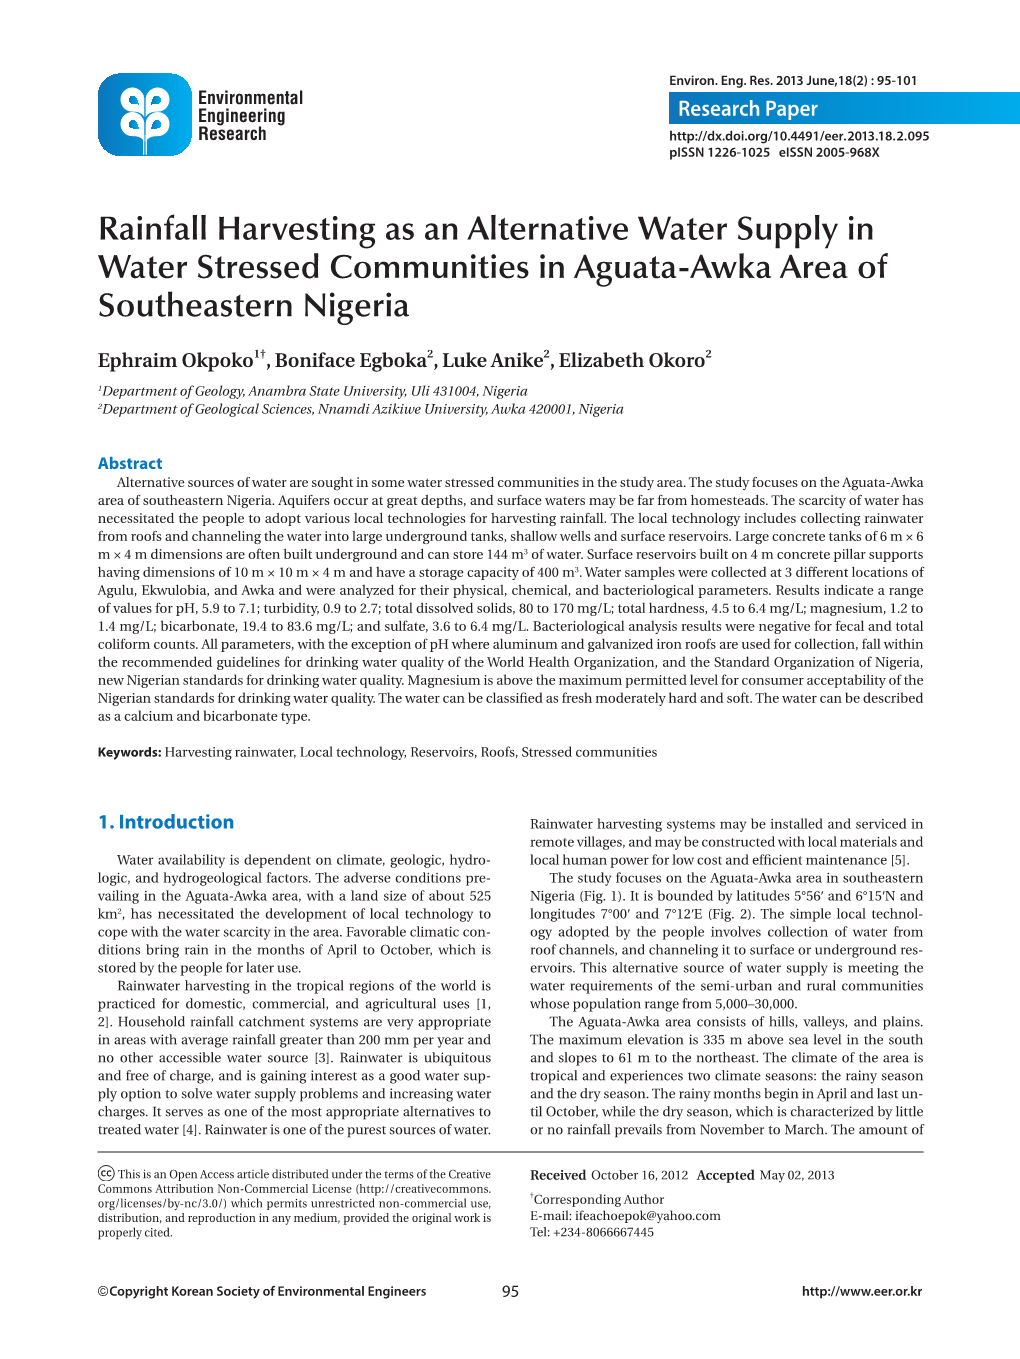 Rainfall Harvesting As an Alternative Water Supply in Water Stressed Communities in Aguata-Awka Area of Southeastern Nigeria